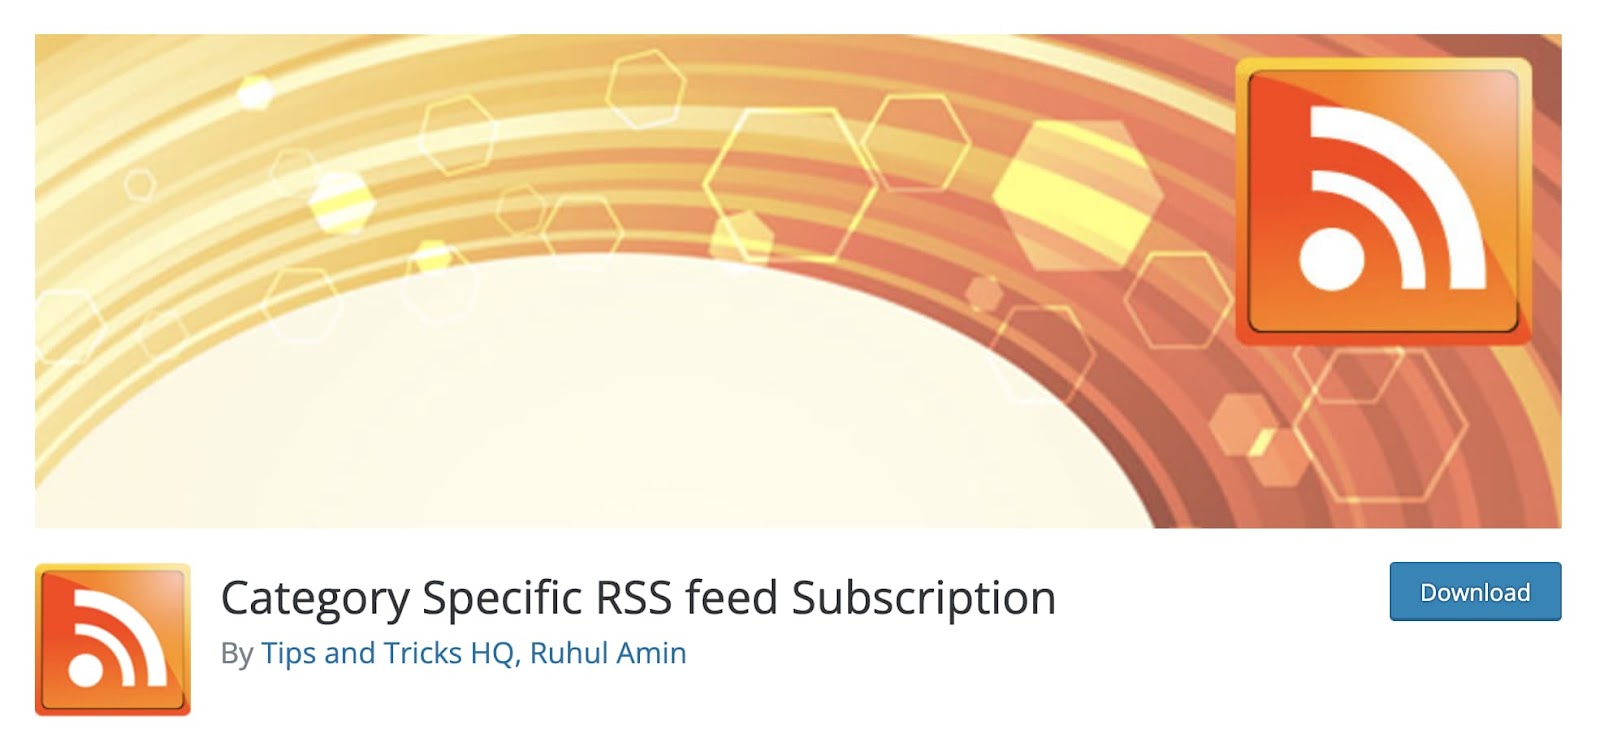 Category Specific RSS Feed Subscription